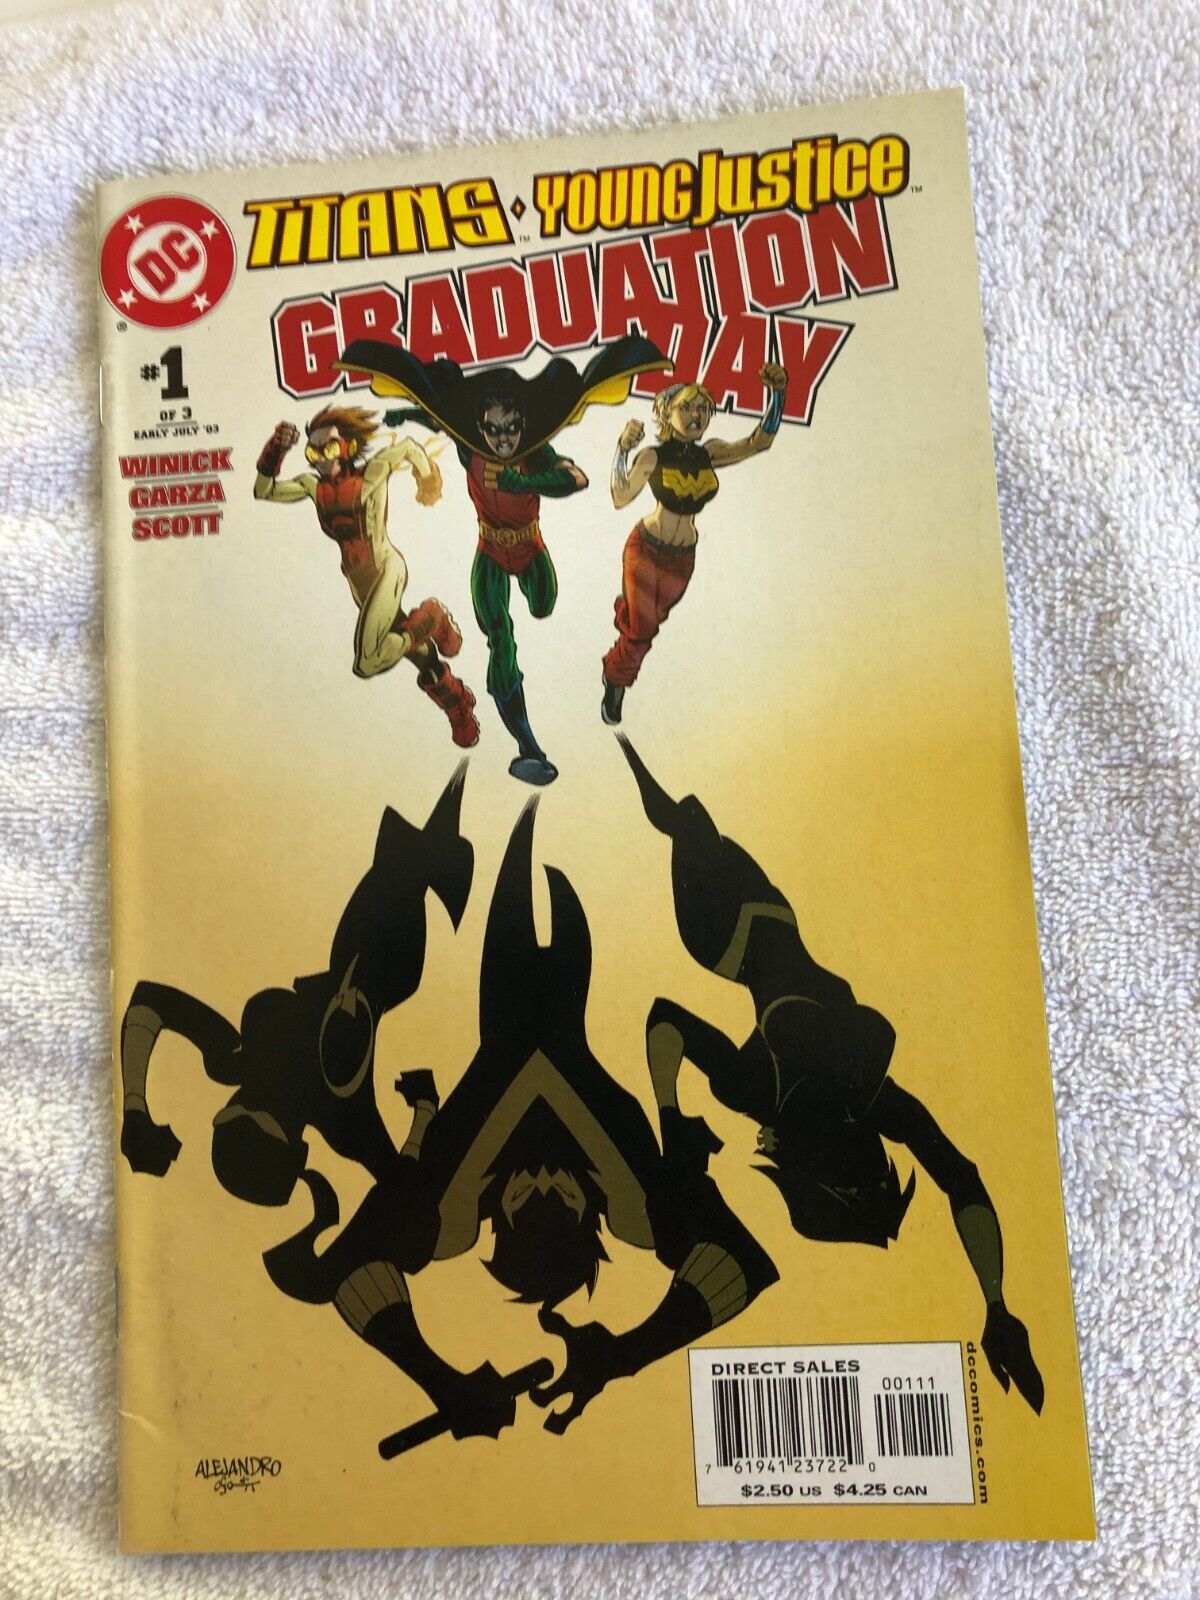 Titans Young Justice Graduation Day #1 (Jul 2003, DC) FN 6.0